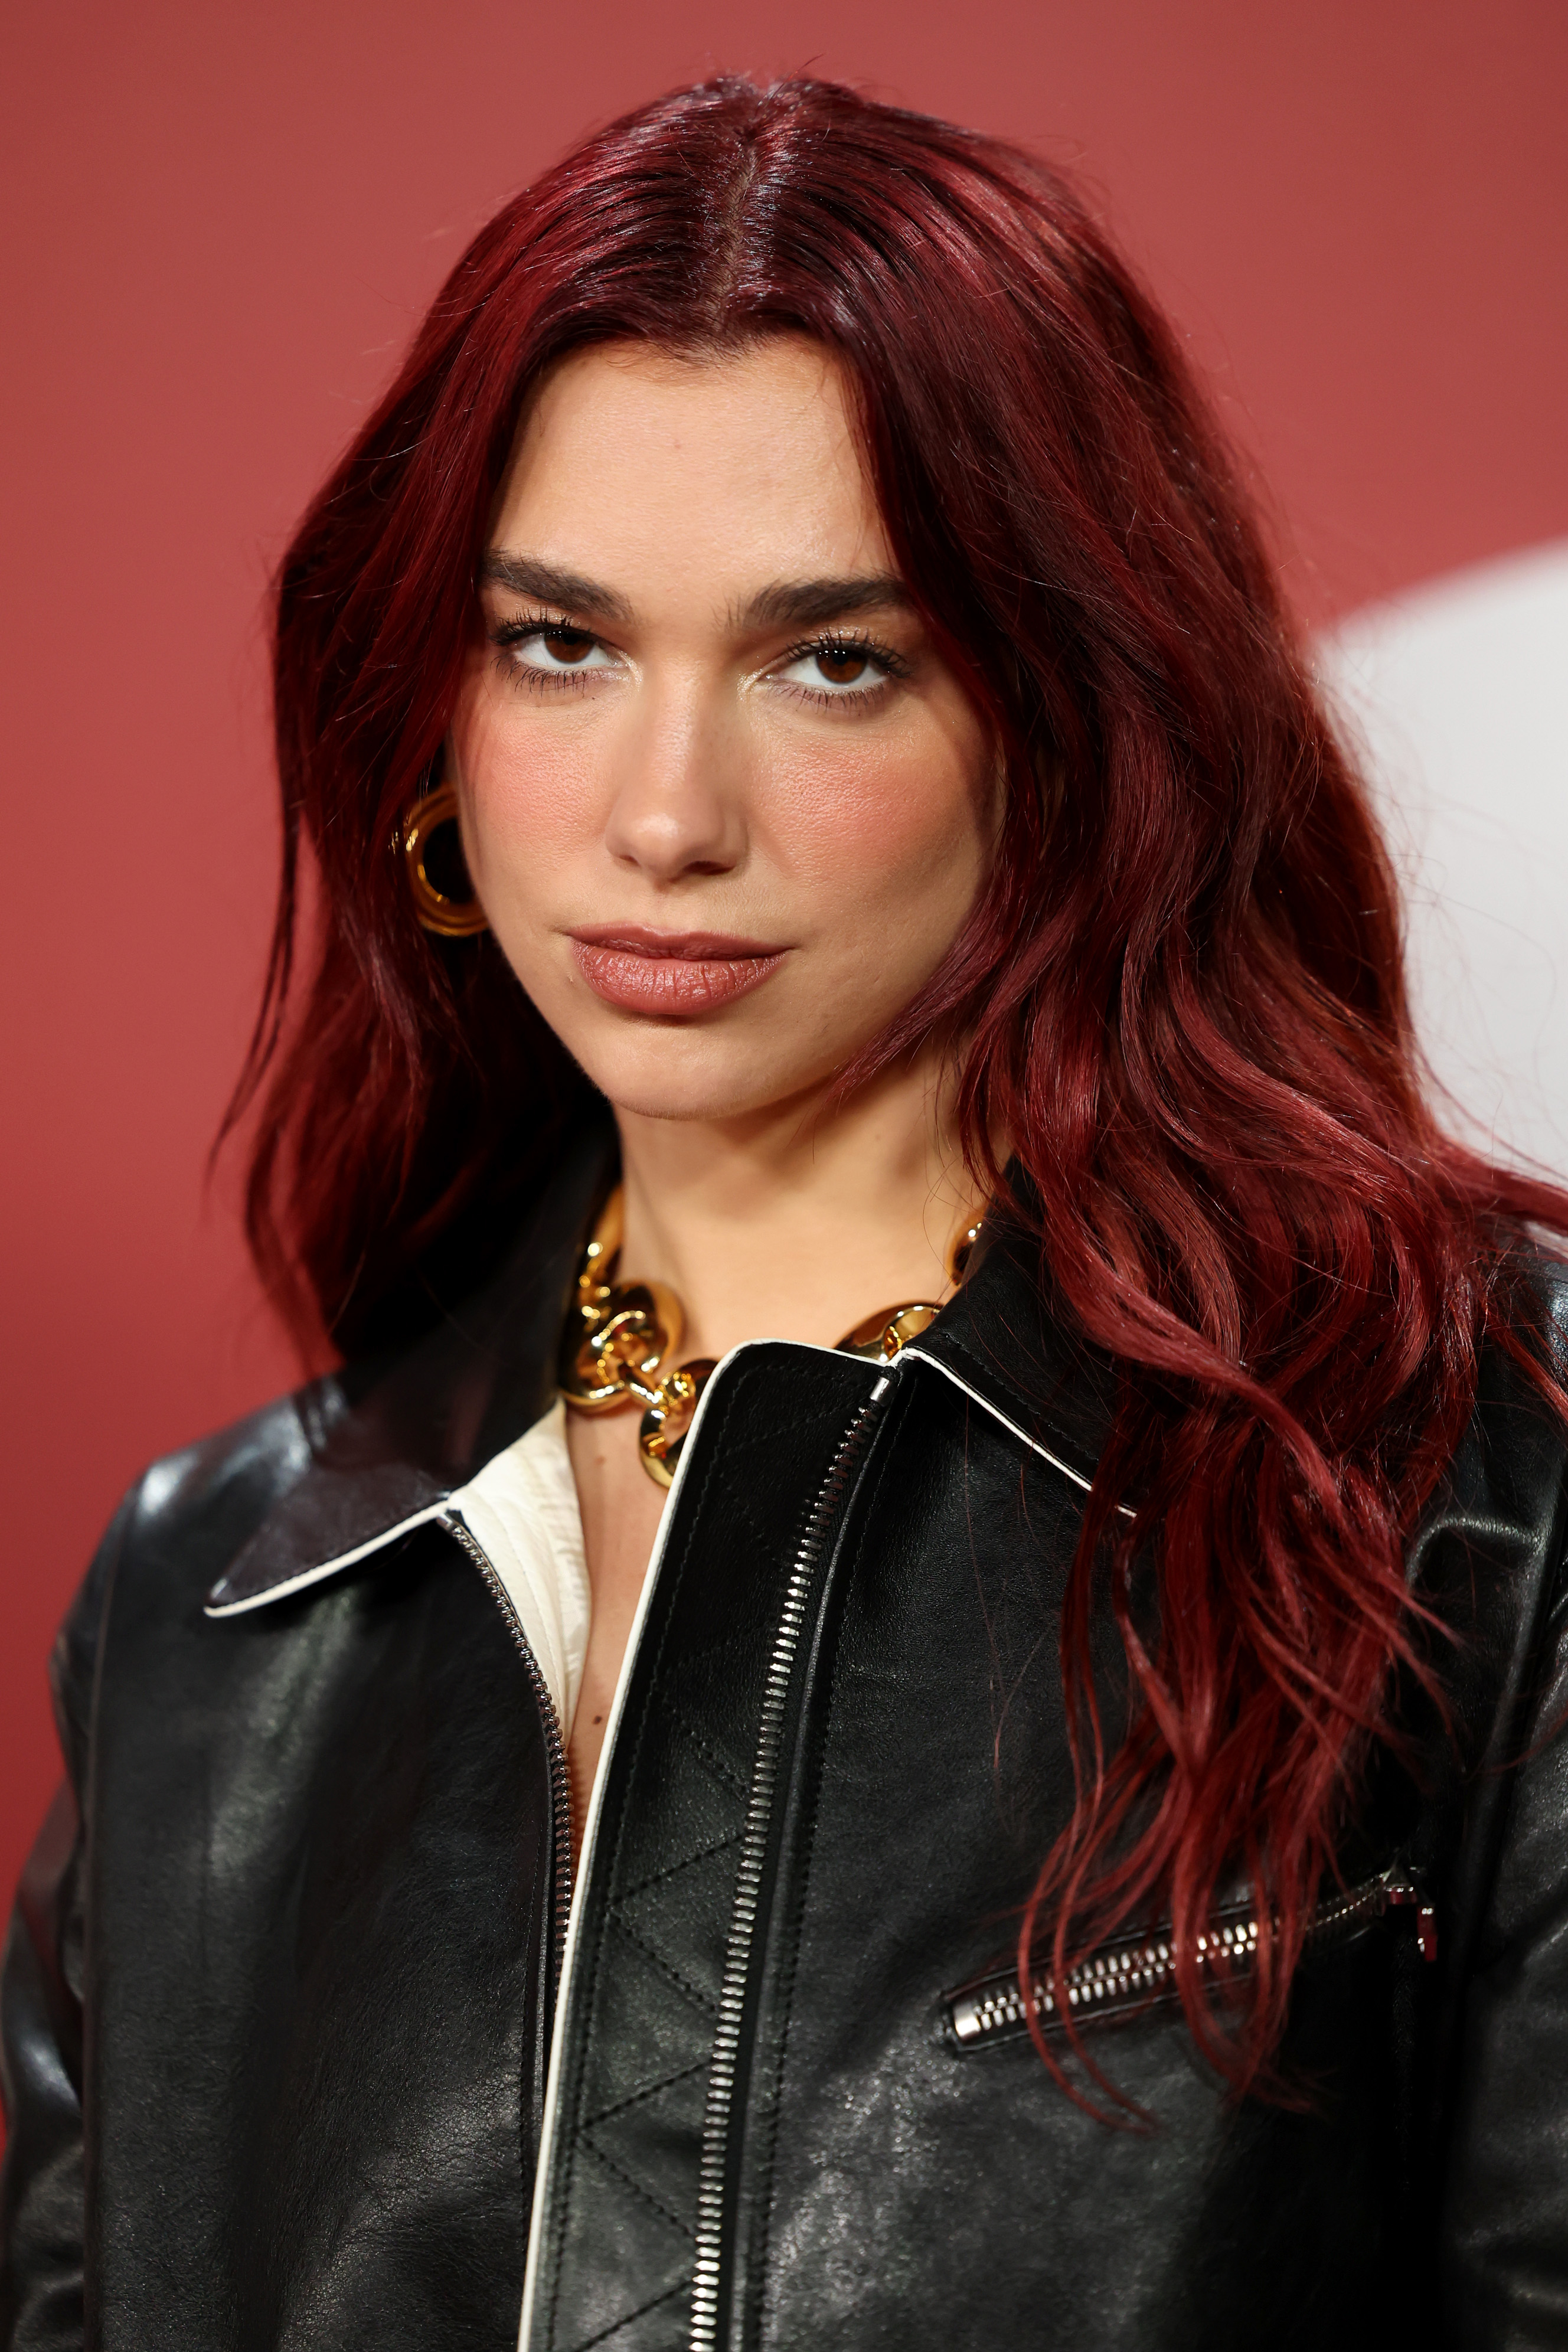 Dua Lipa looks at the camera wearing a leather jacket and chunky gold necklace.